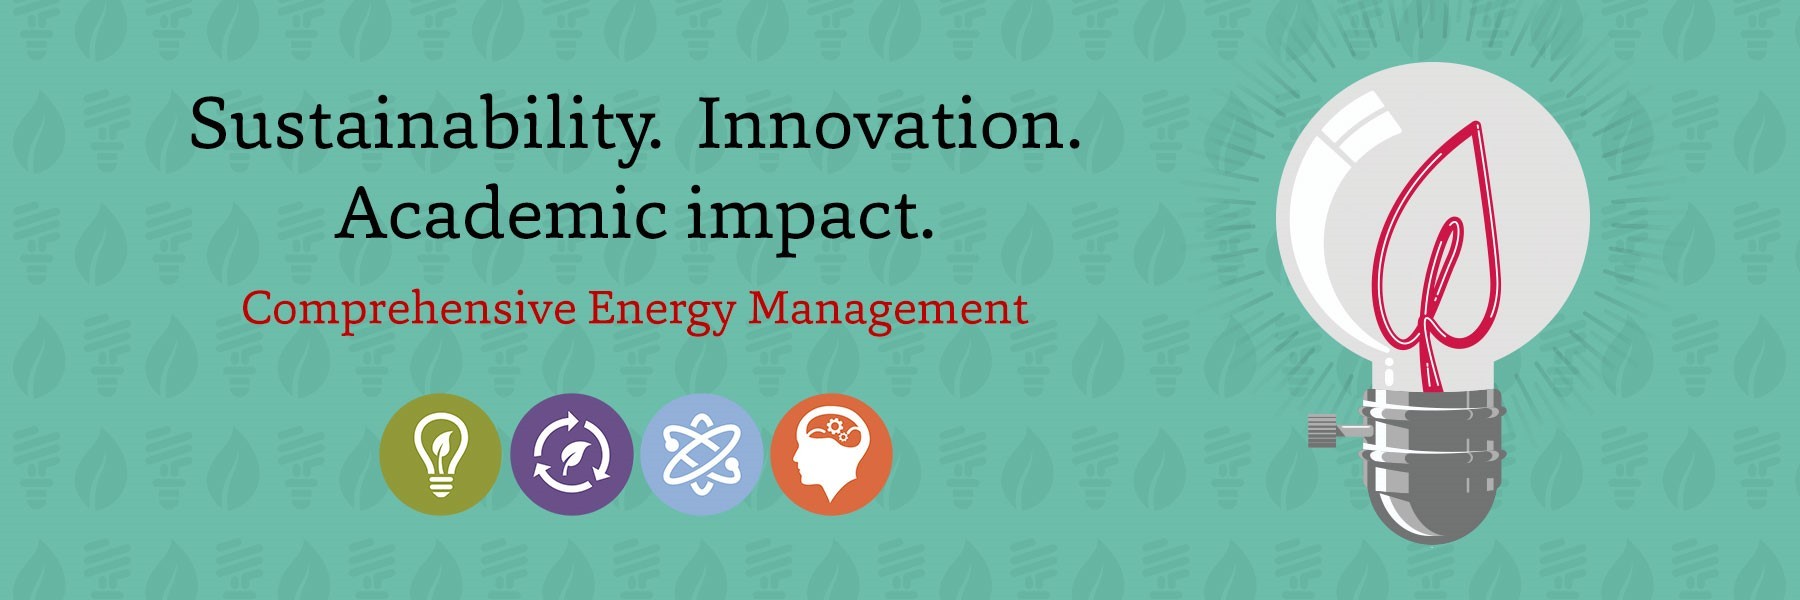 Comprehensive Energy Management Project - sustainability - innovation - academic impact